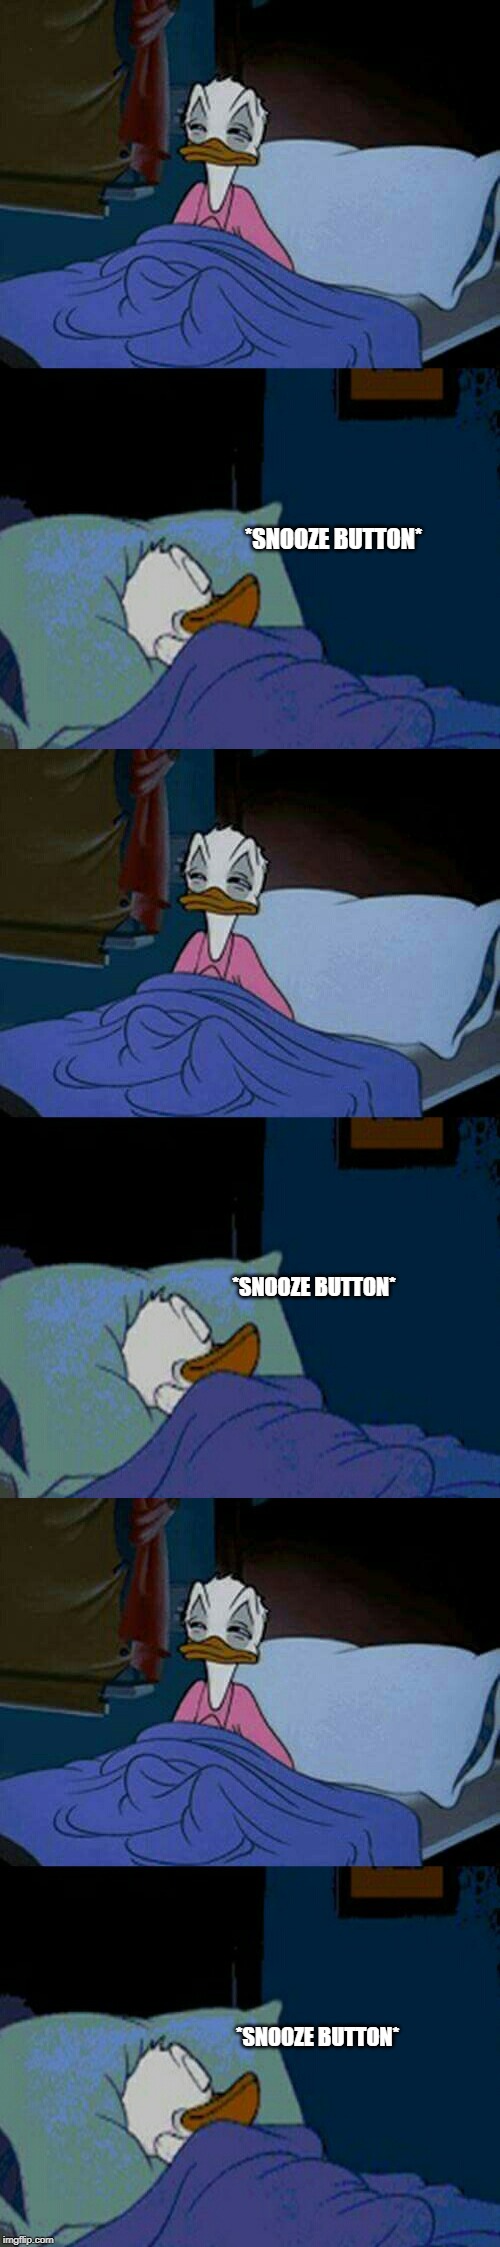 *SNOOZE BUTTON* *SNOOZE BUTTON* *SNOOZE BUTTON* | image tagged in sleepy donald duck in bed | made w/ Imgflip meme maker